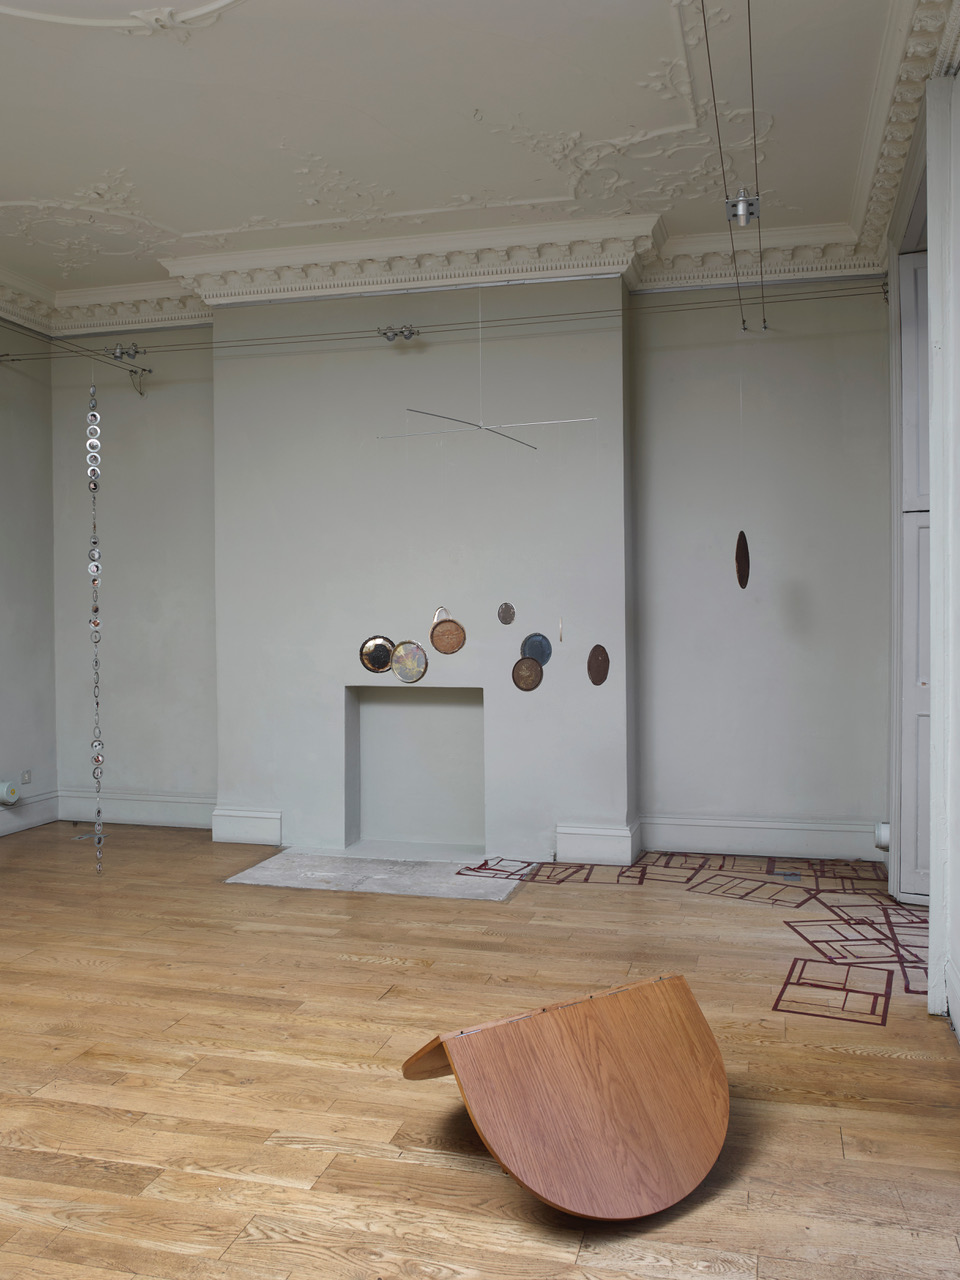 Nicky Hirst 'The Electorate' installation view, photography by Andy Keate